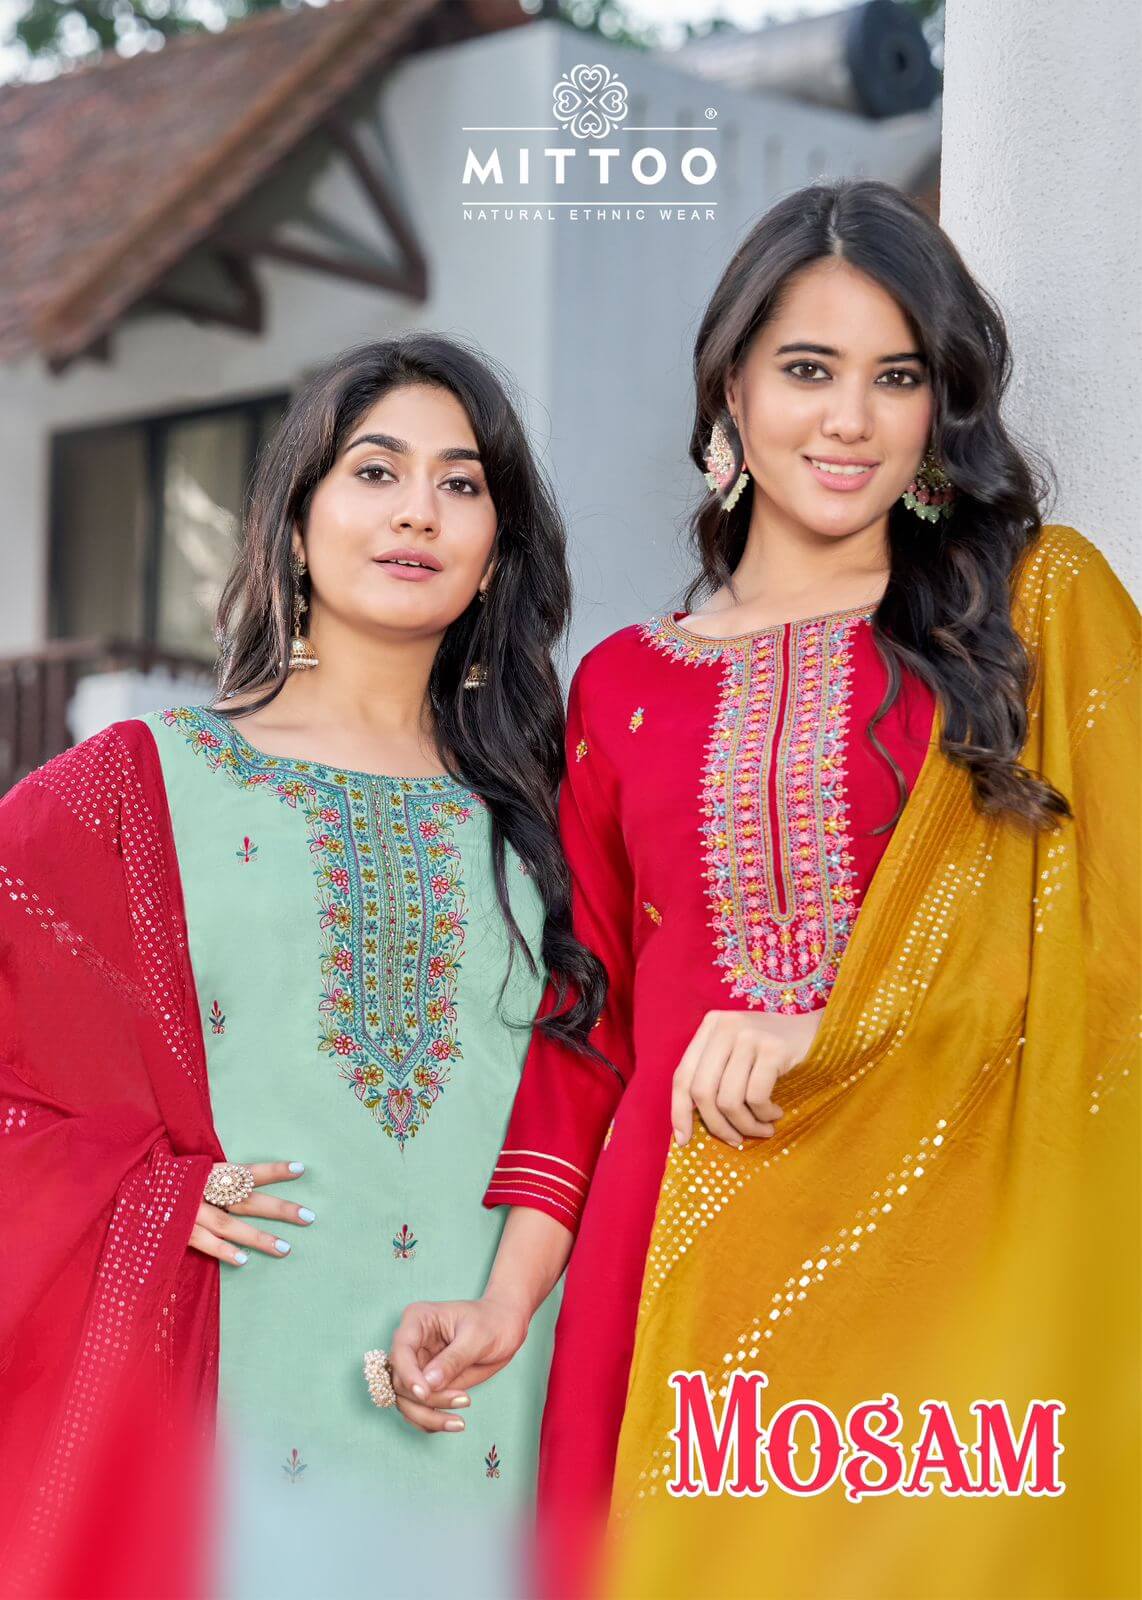 Mittoo Mosam Embroidery Salwar Kameez Catalog collection 8